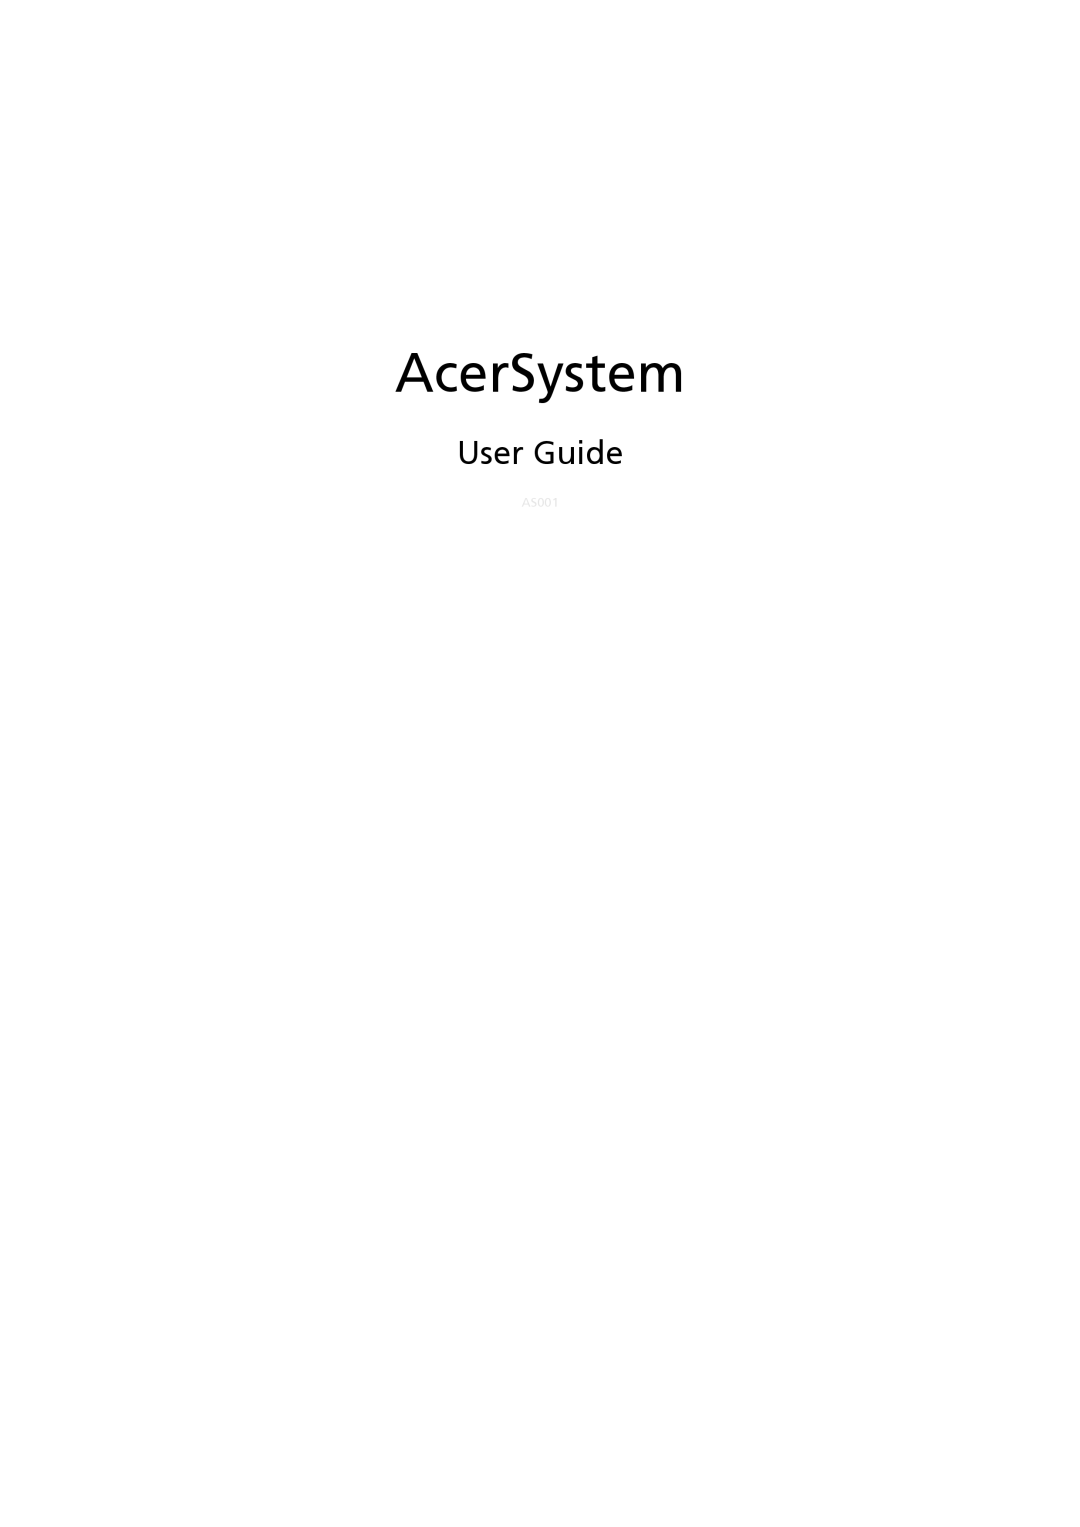 Acer X1300 manual User Guide, AcerSystem, AS001 